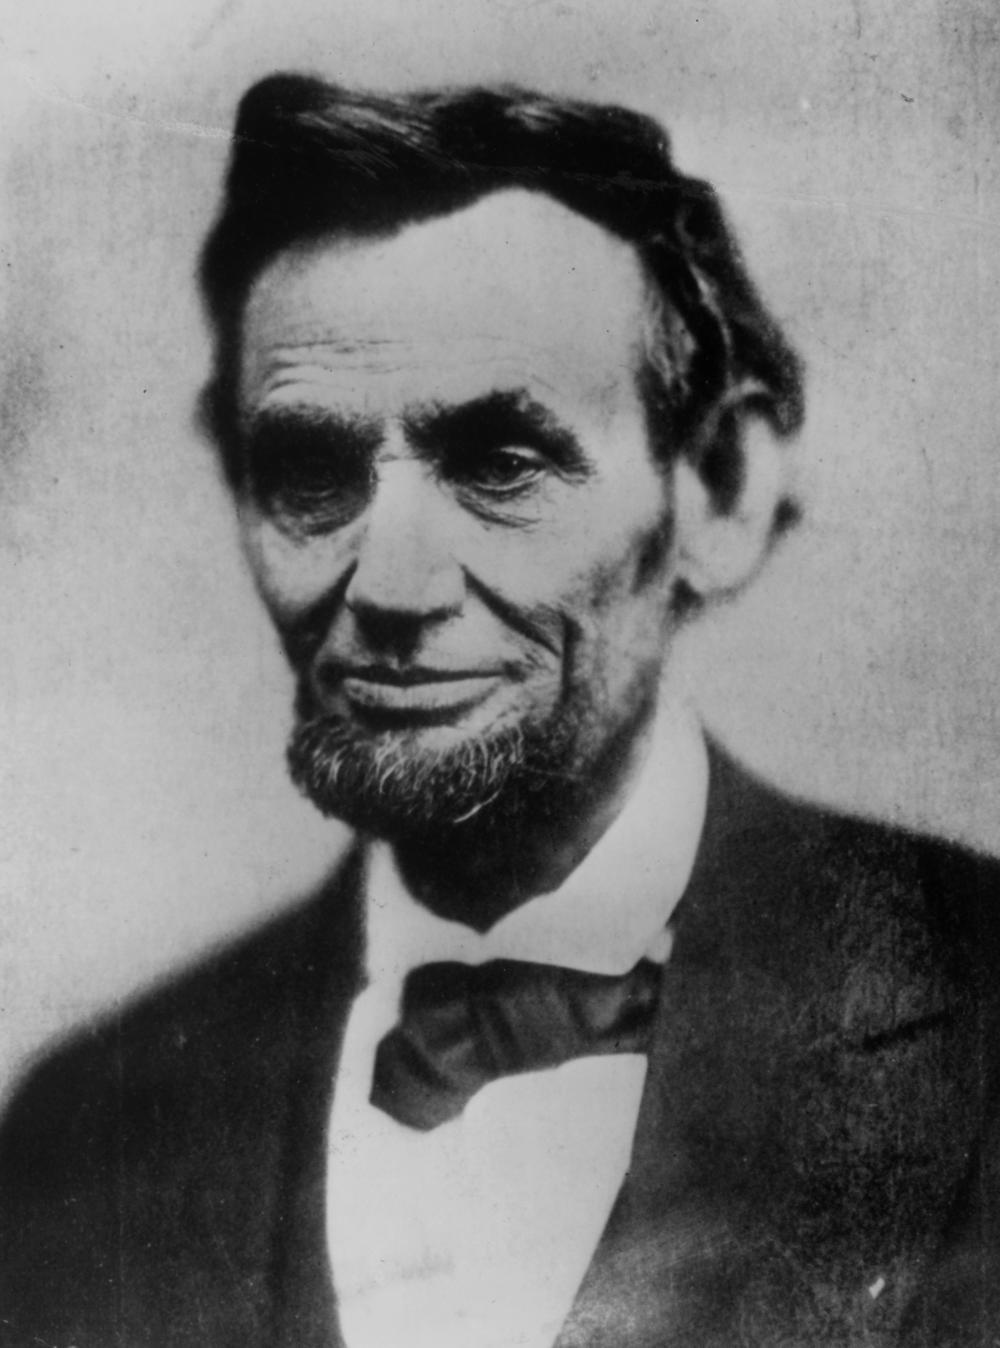 President Abraham Lincoln in 1865, the year of his assassination.